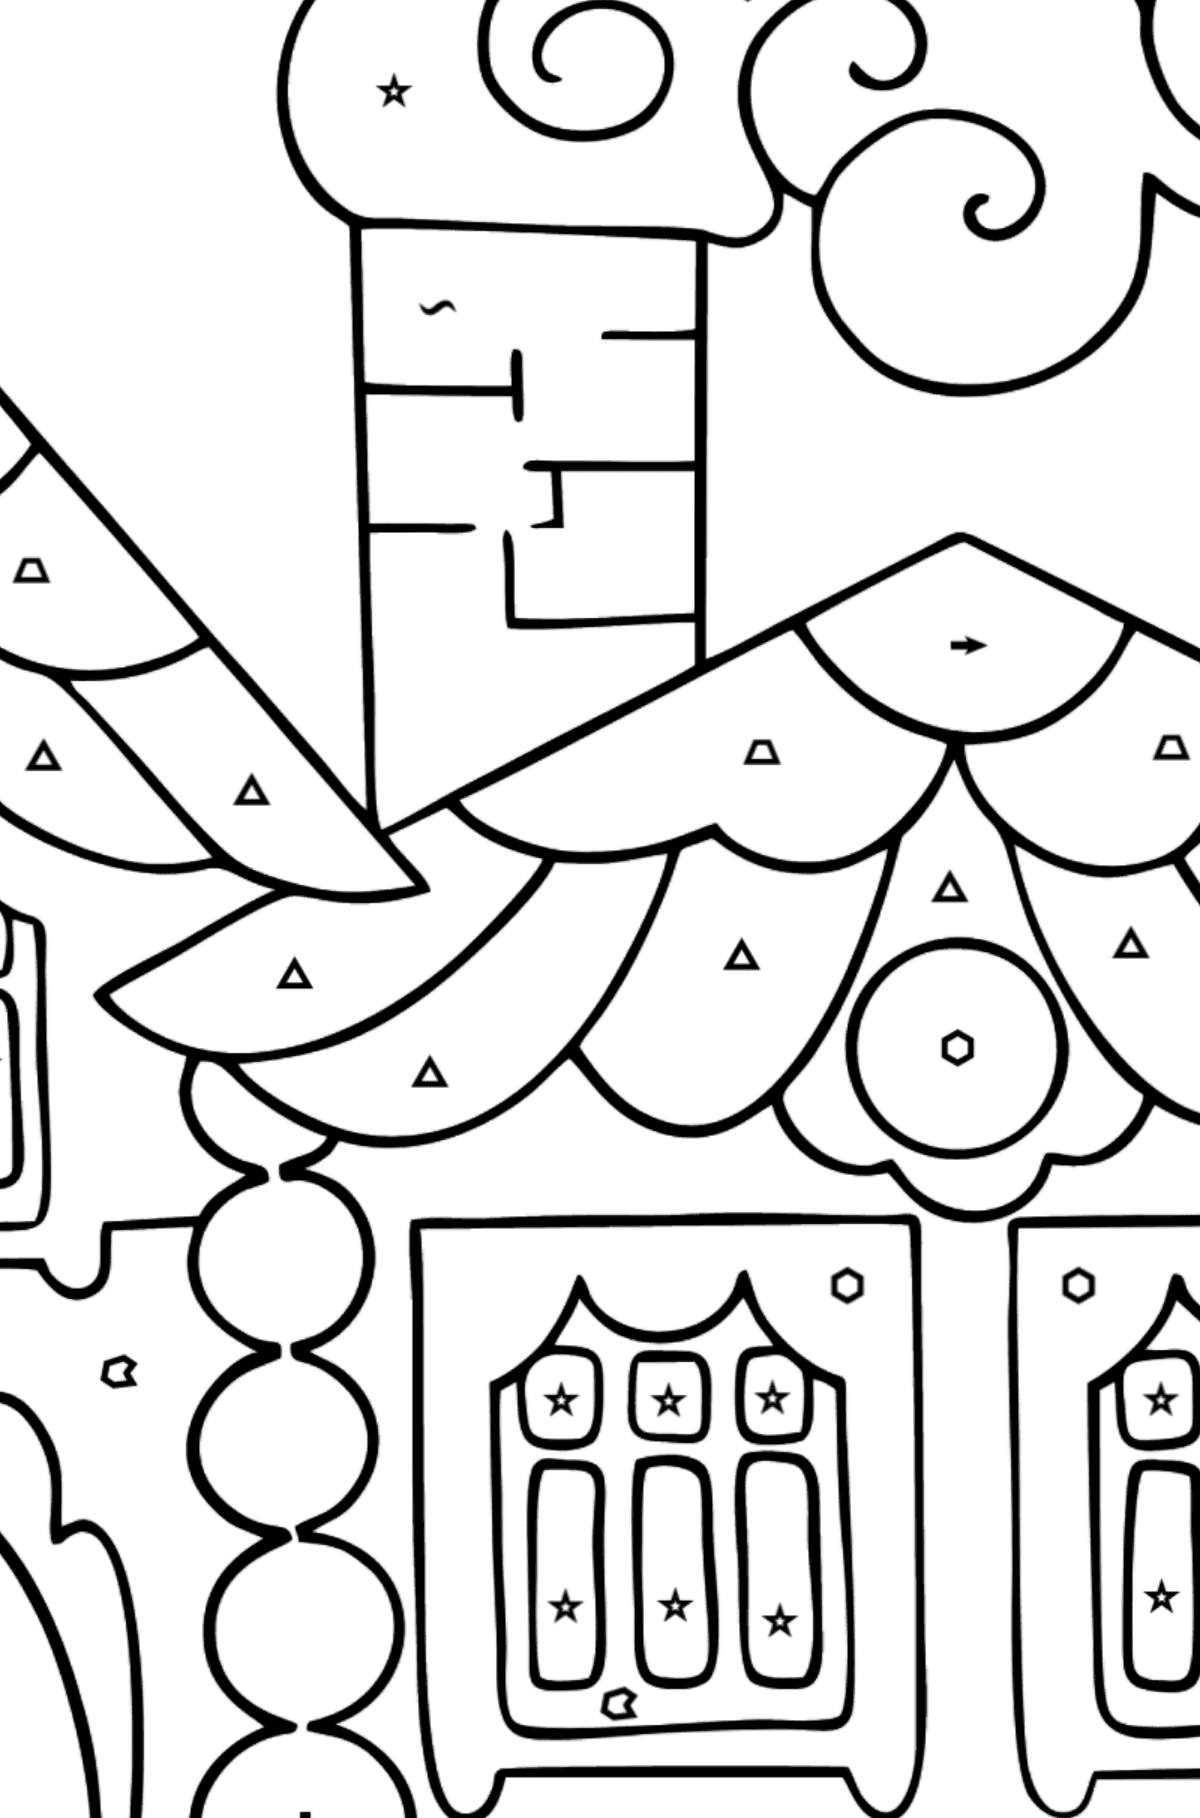 House in the Forest Coloring Page (difficult) - Coloring by Symbols and Geometric Shapes for Kids